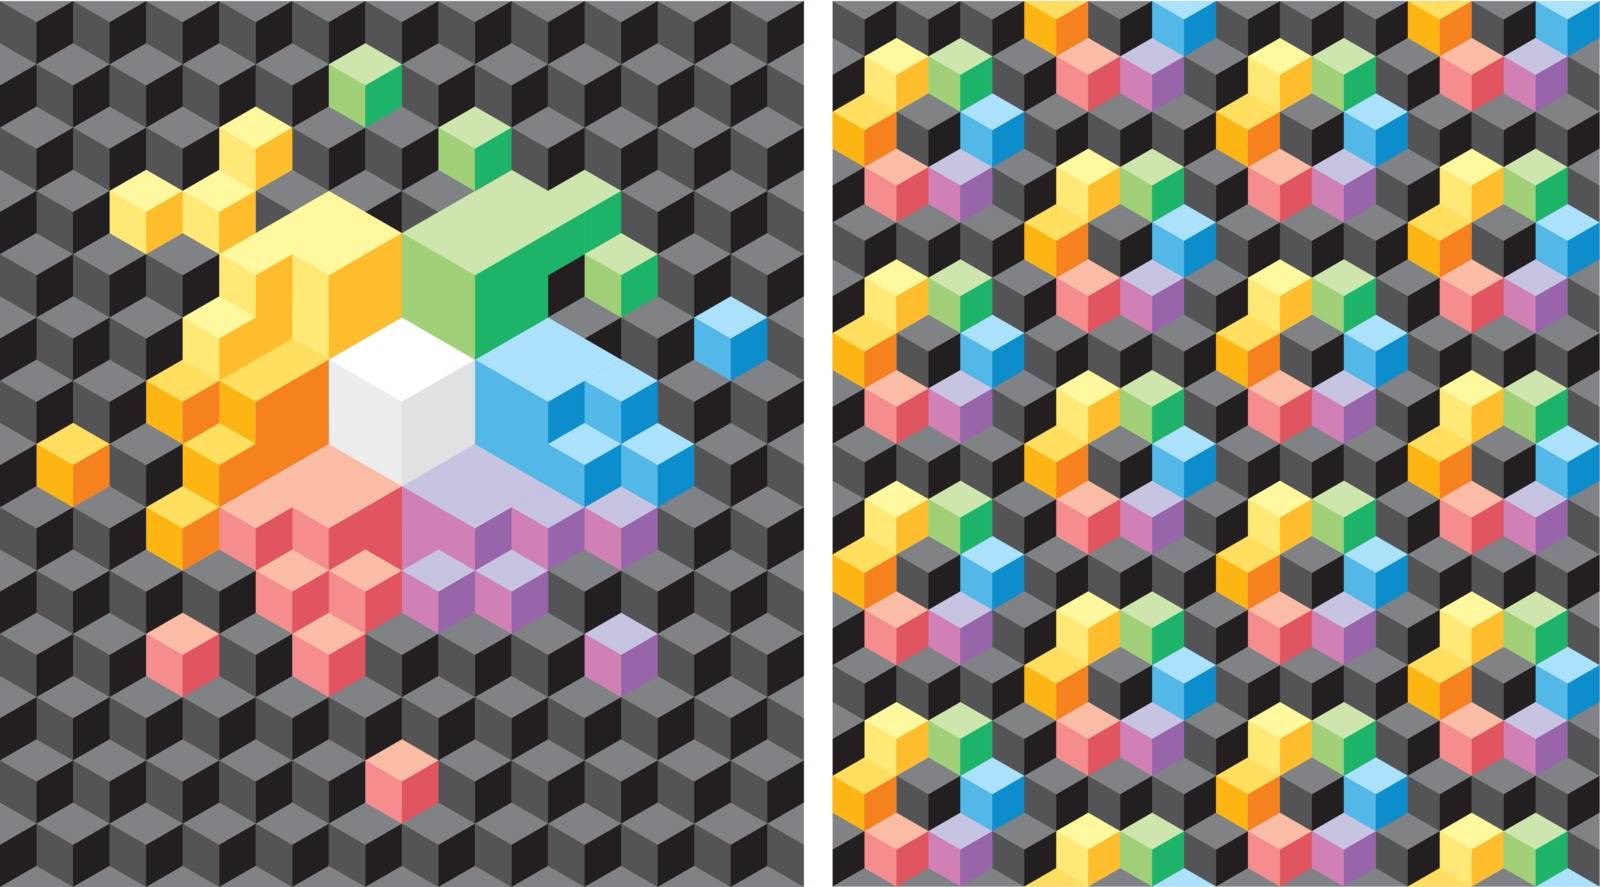 Background with black and multicolored cubes by ildogesto